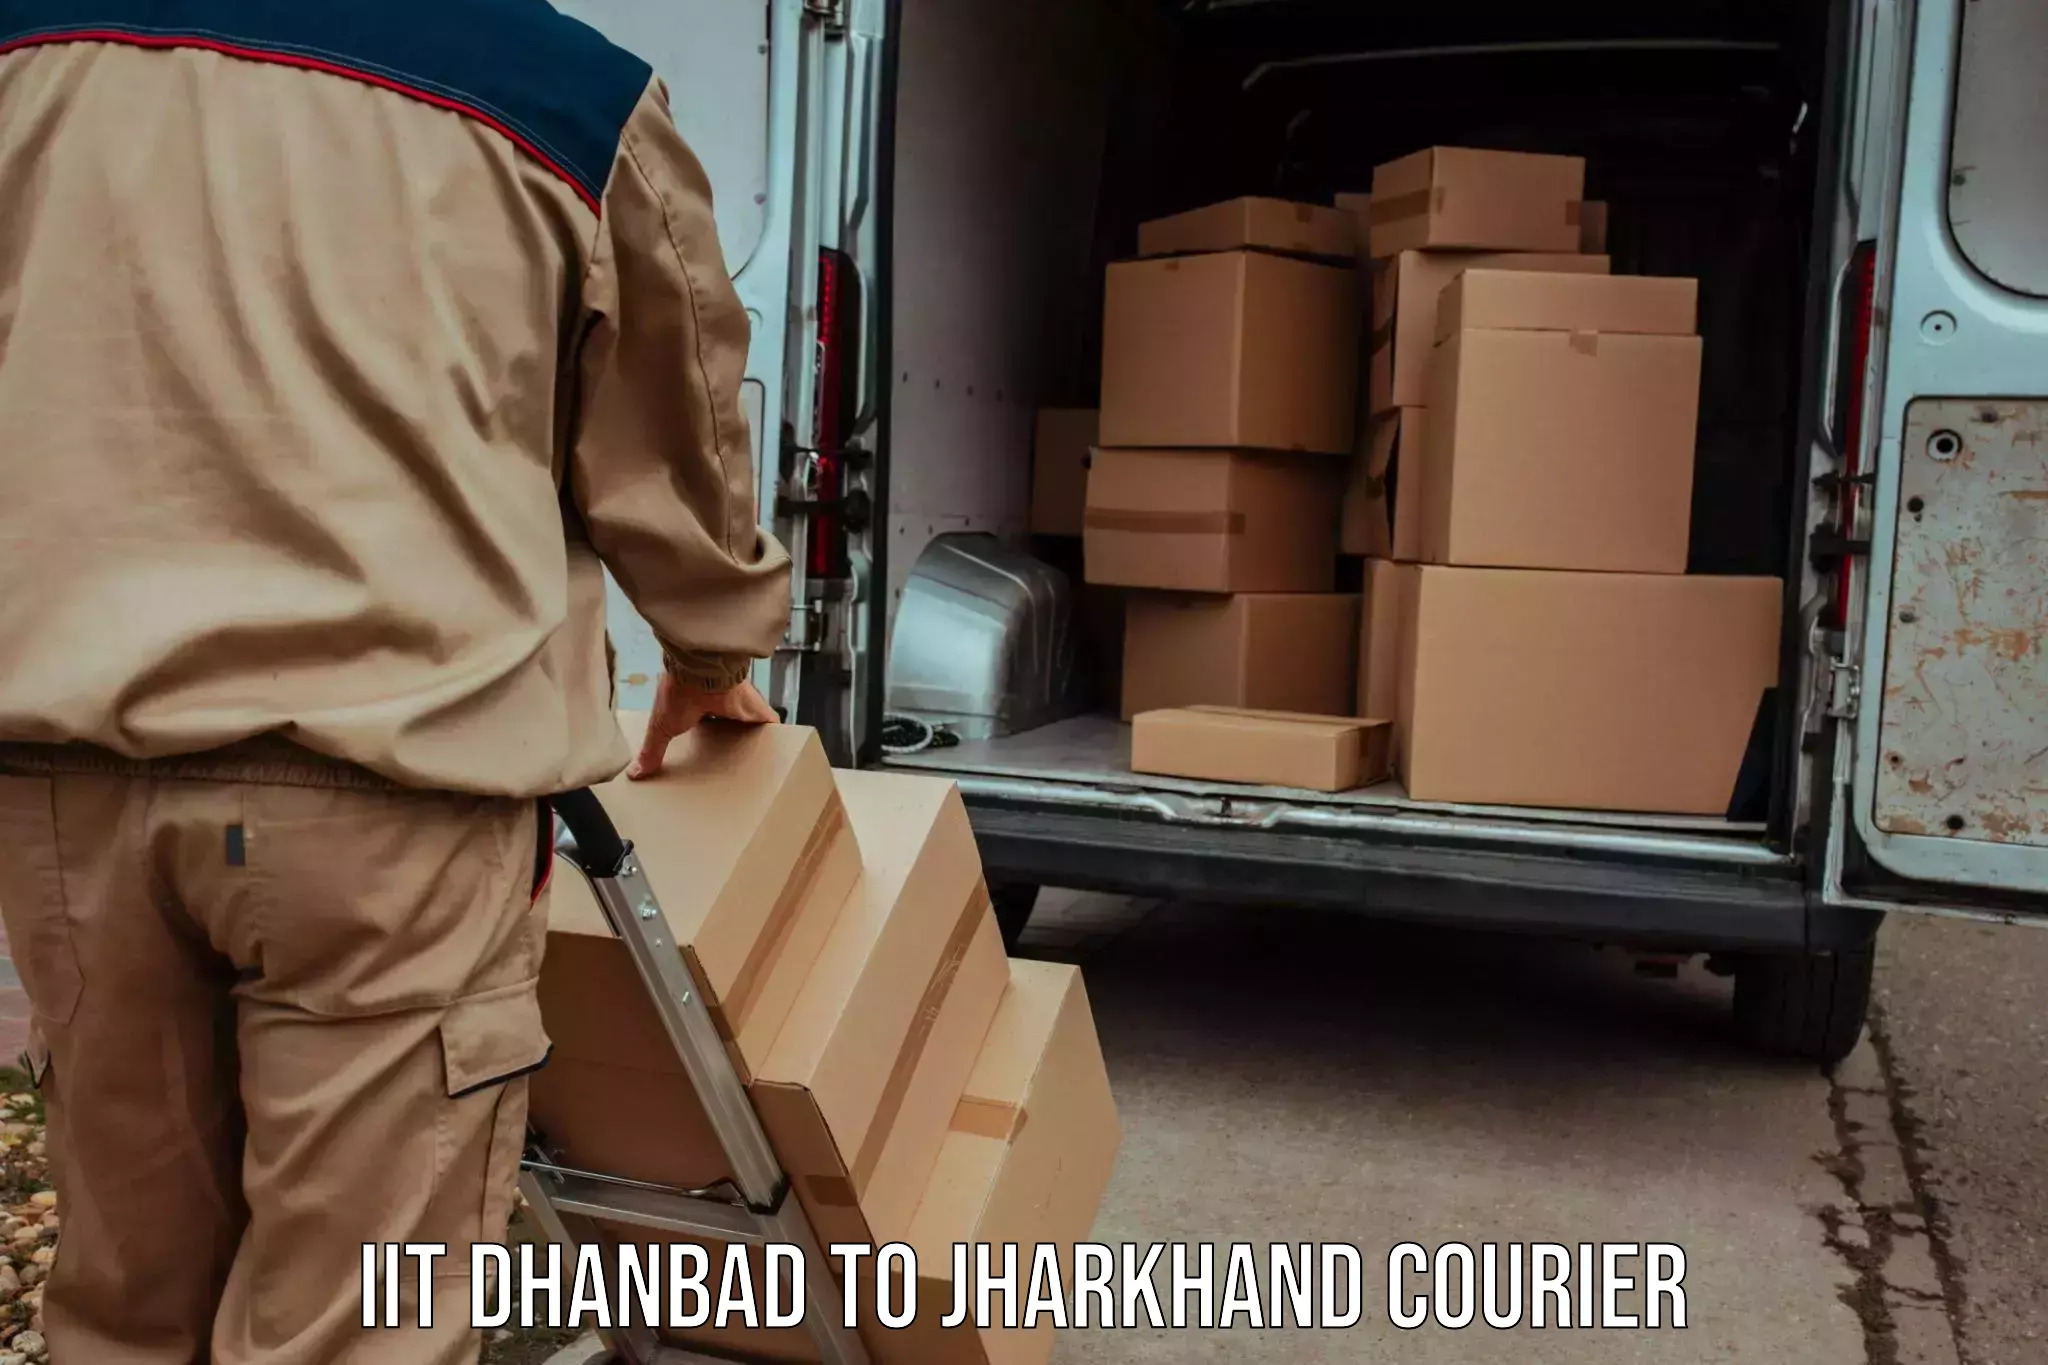 End-to-end delivery IIT Dhanbad to IIT Dhanbad